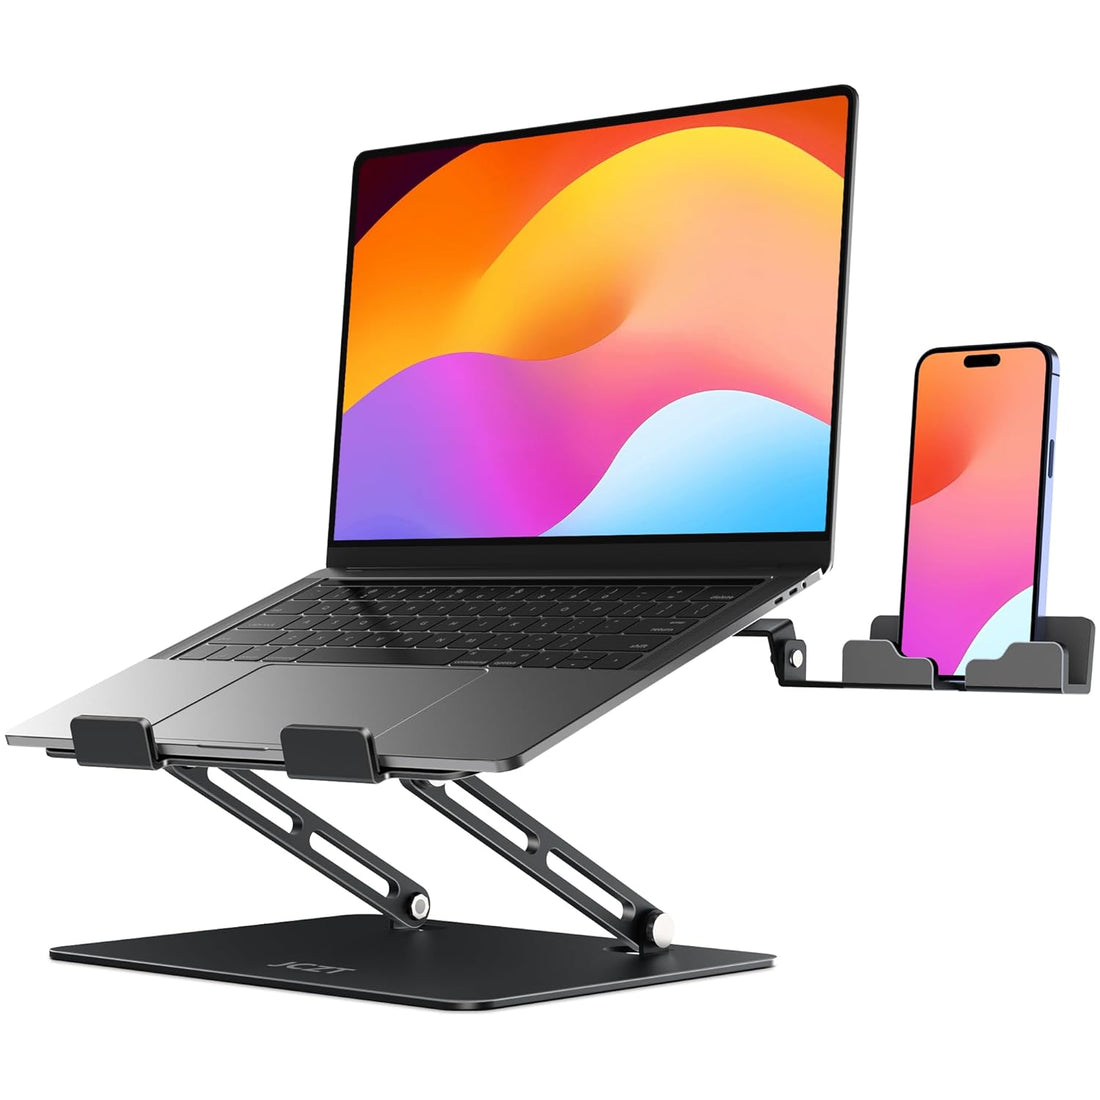 JCZT Adjustale Laptop Stand for Desk with Phone Holder, Aluminum Universal Computer Stand for Laptop, Ergonomic Laptop Riser fits All MacBook 11-16 inches, Black